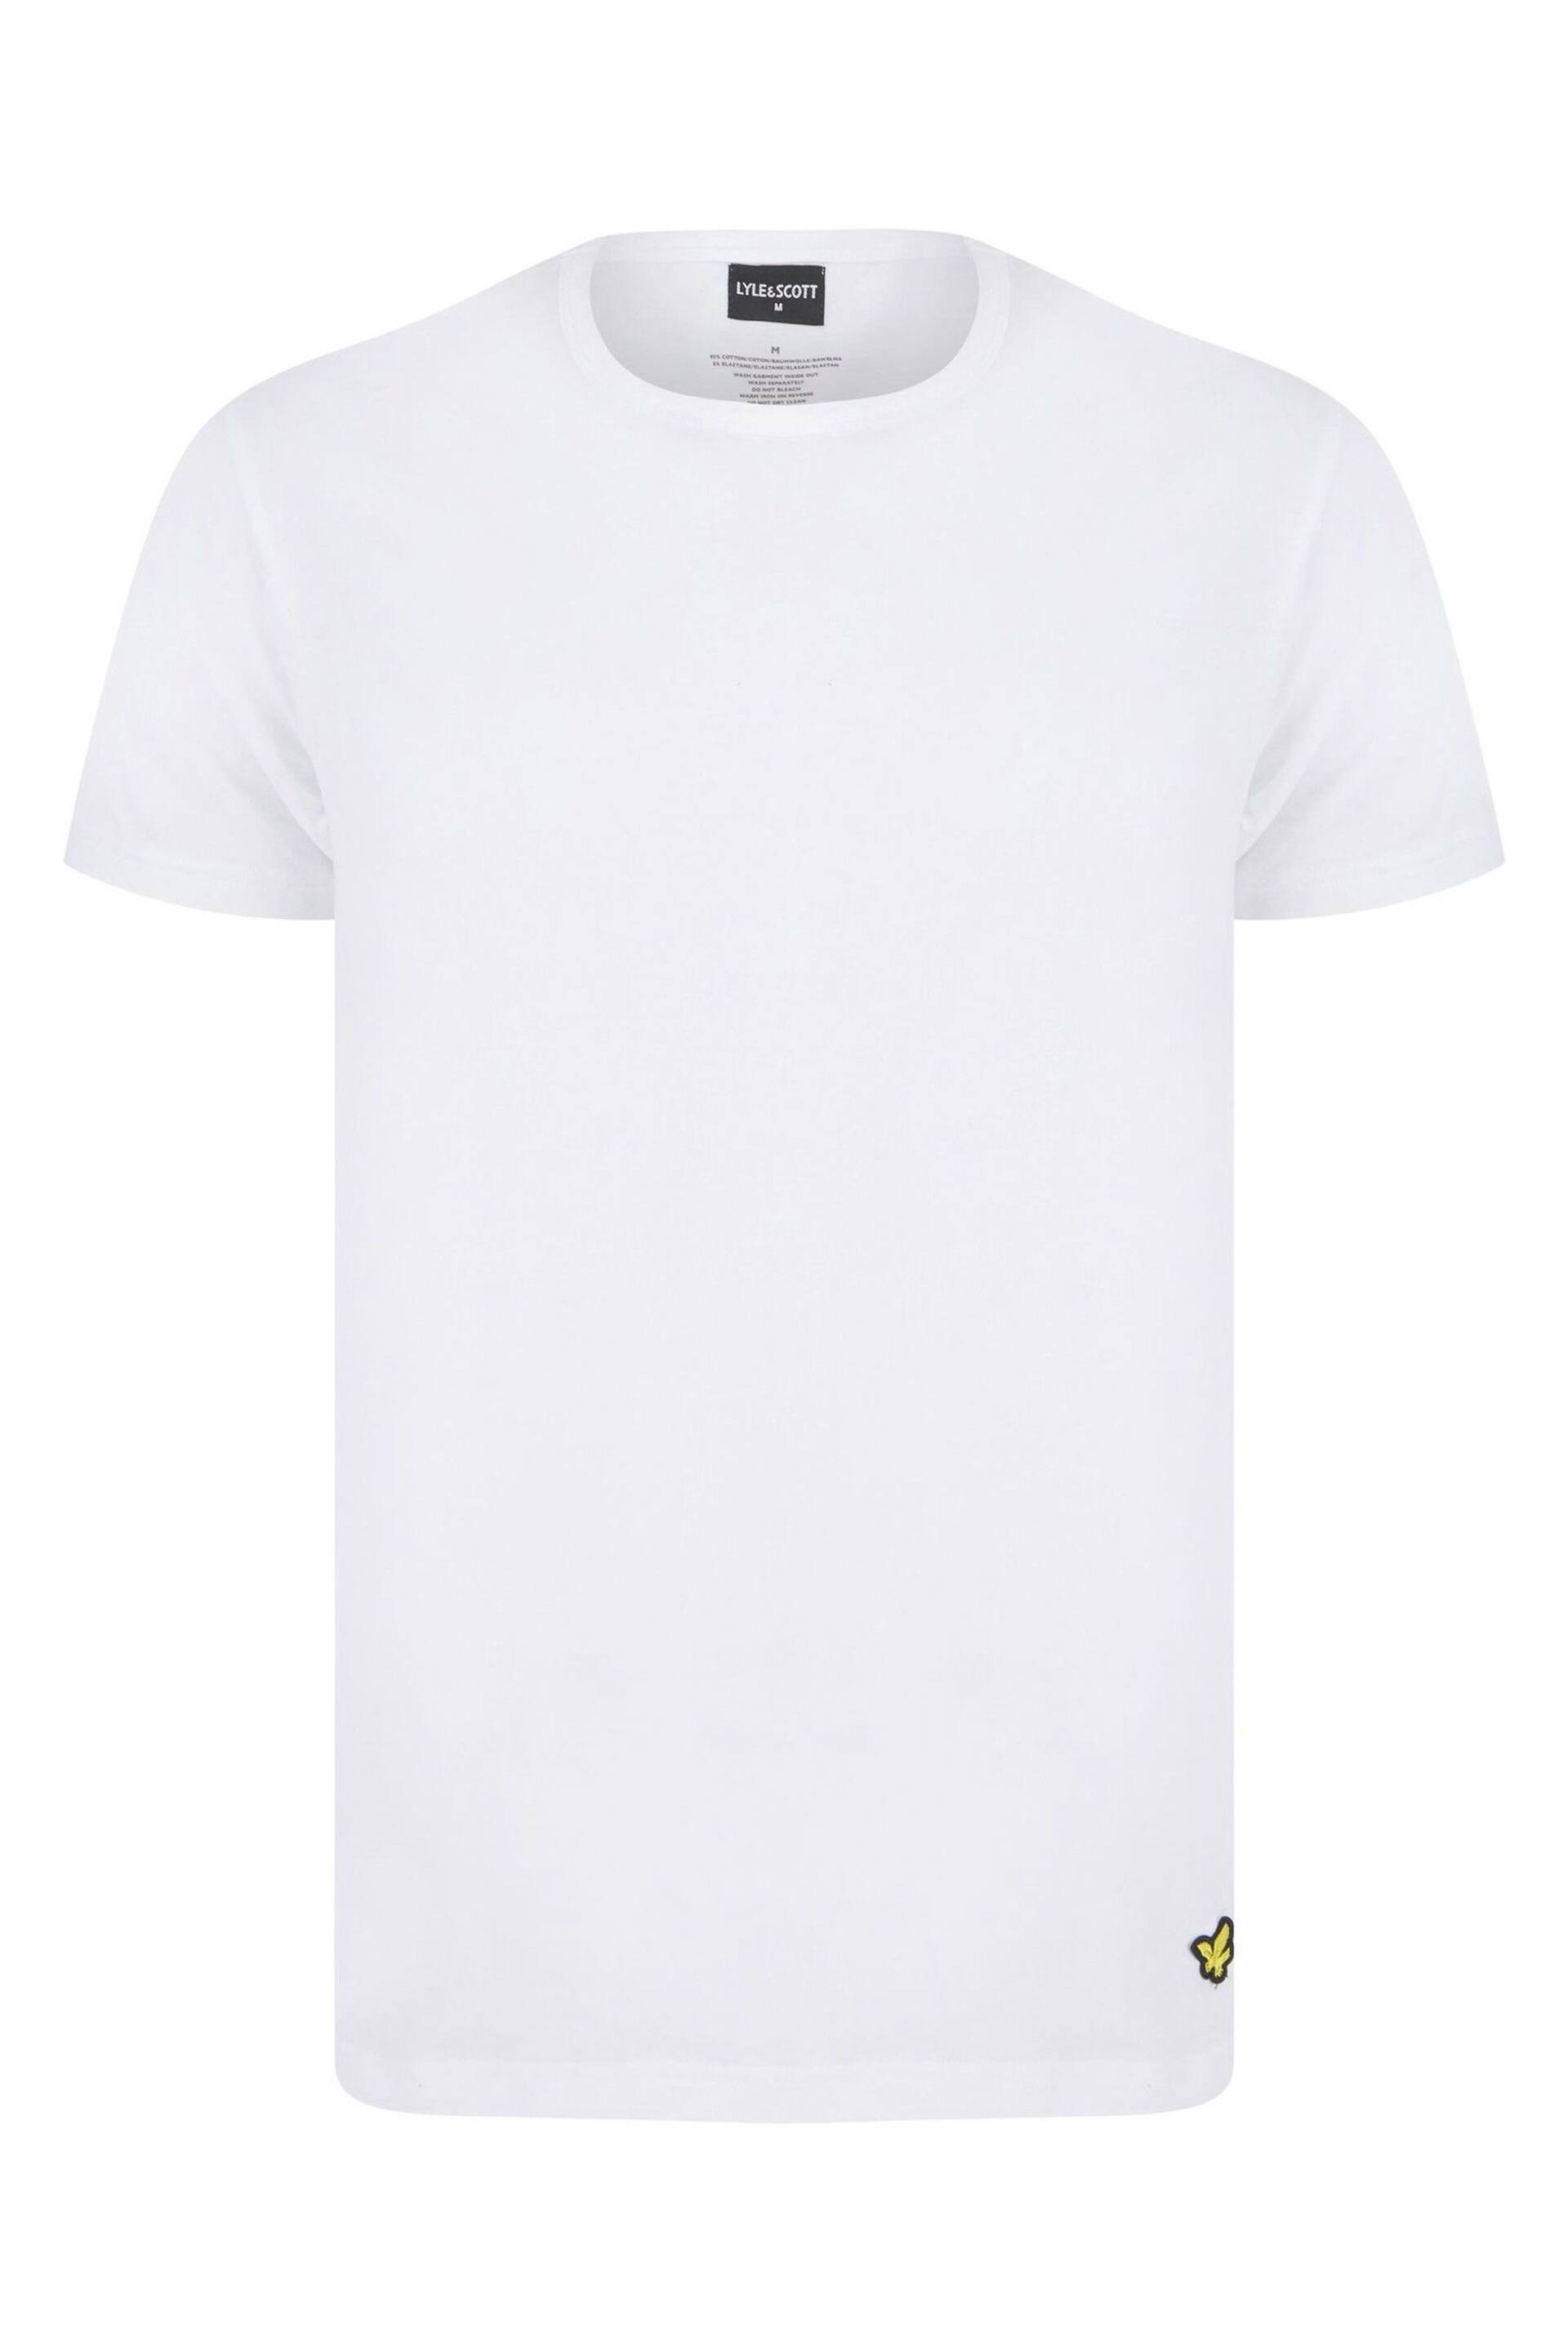 Lyle & Scott Grey Cash Top And Joggers Set - Image 2 of 6